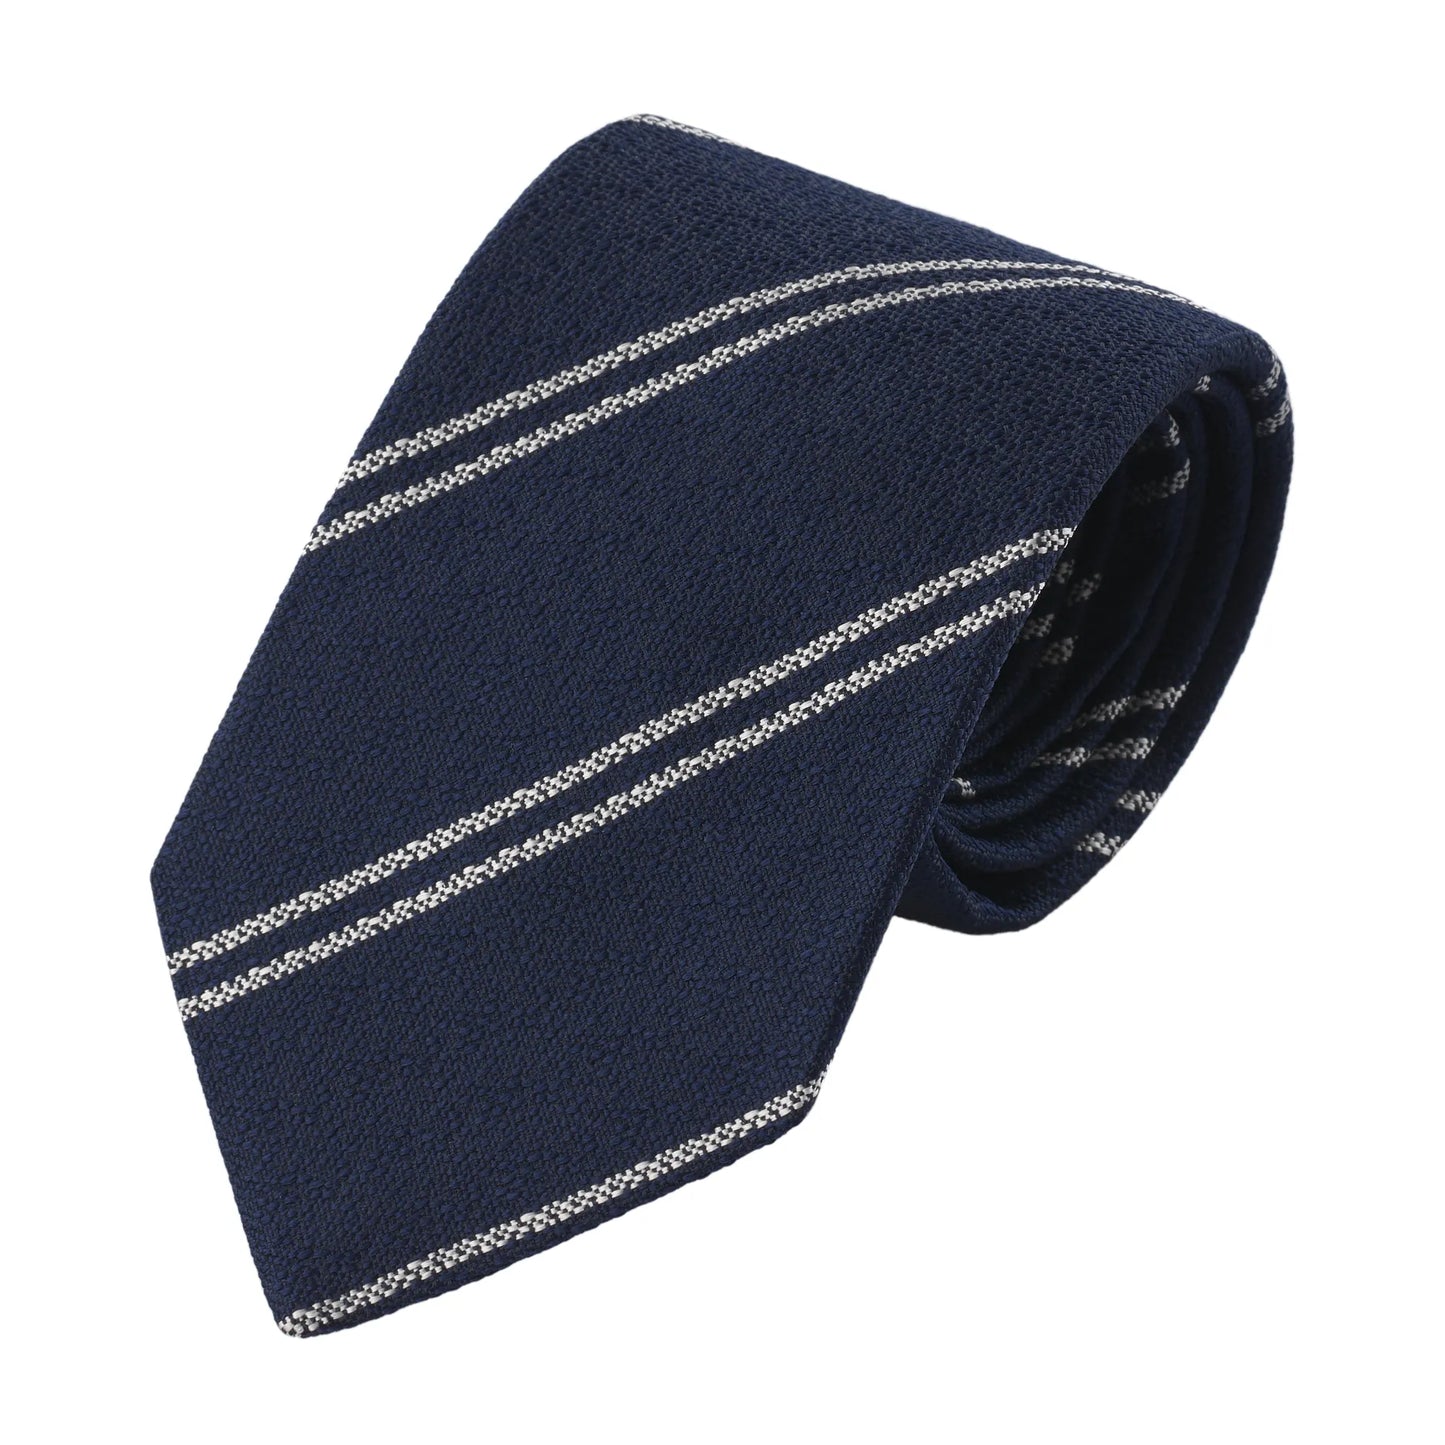 Regimental Silk Tipped Tie in Blue and White